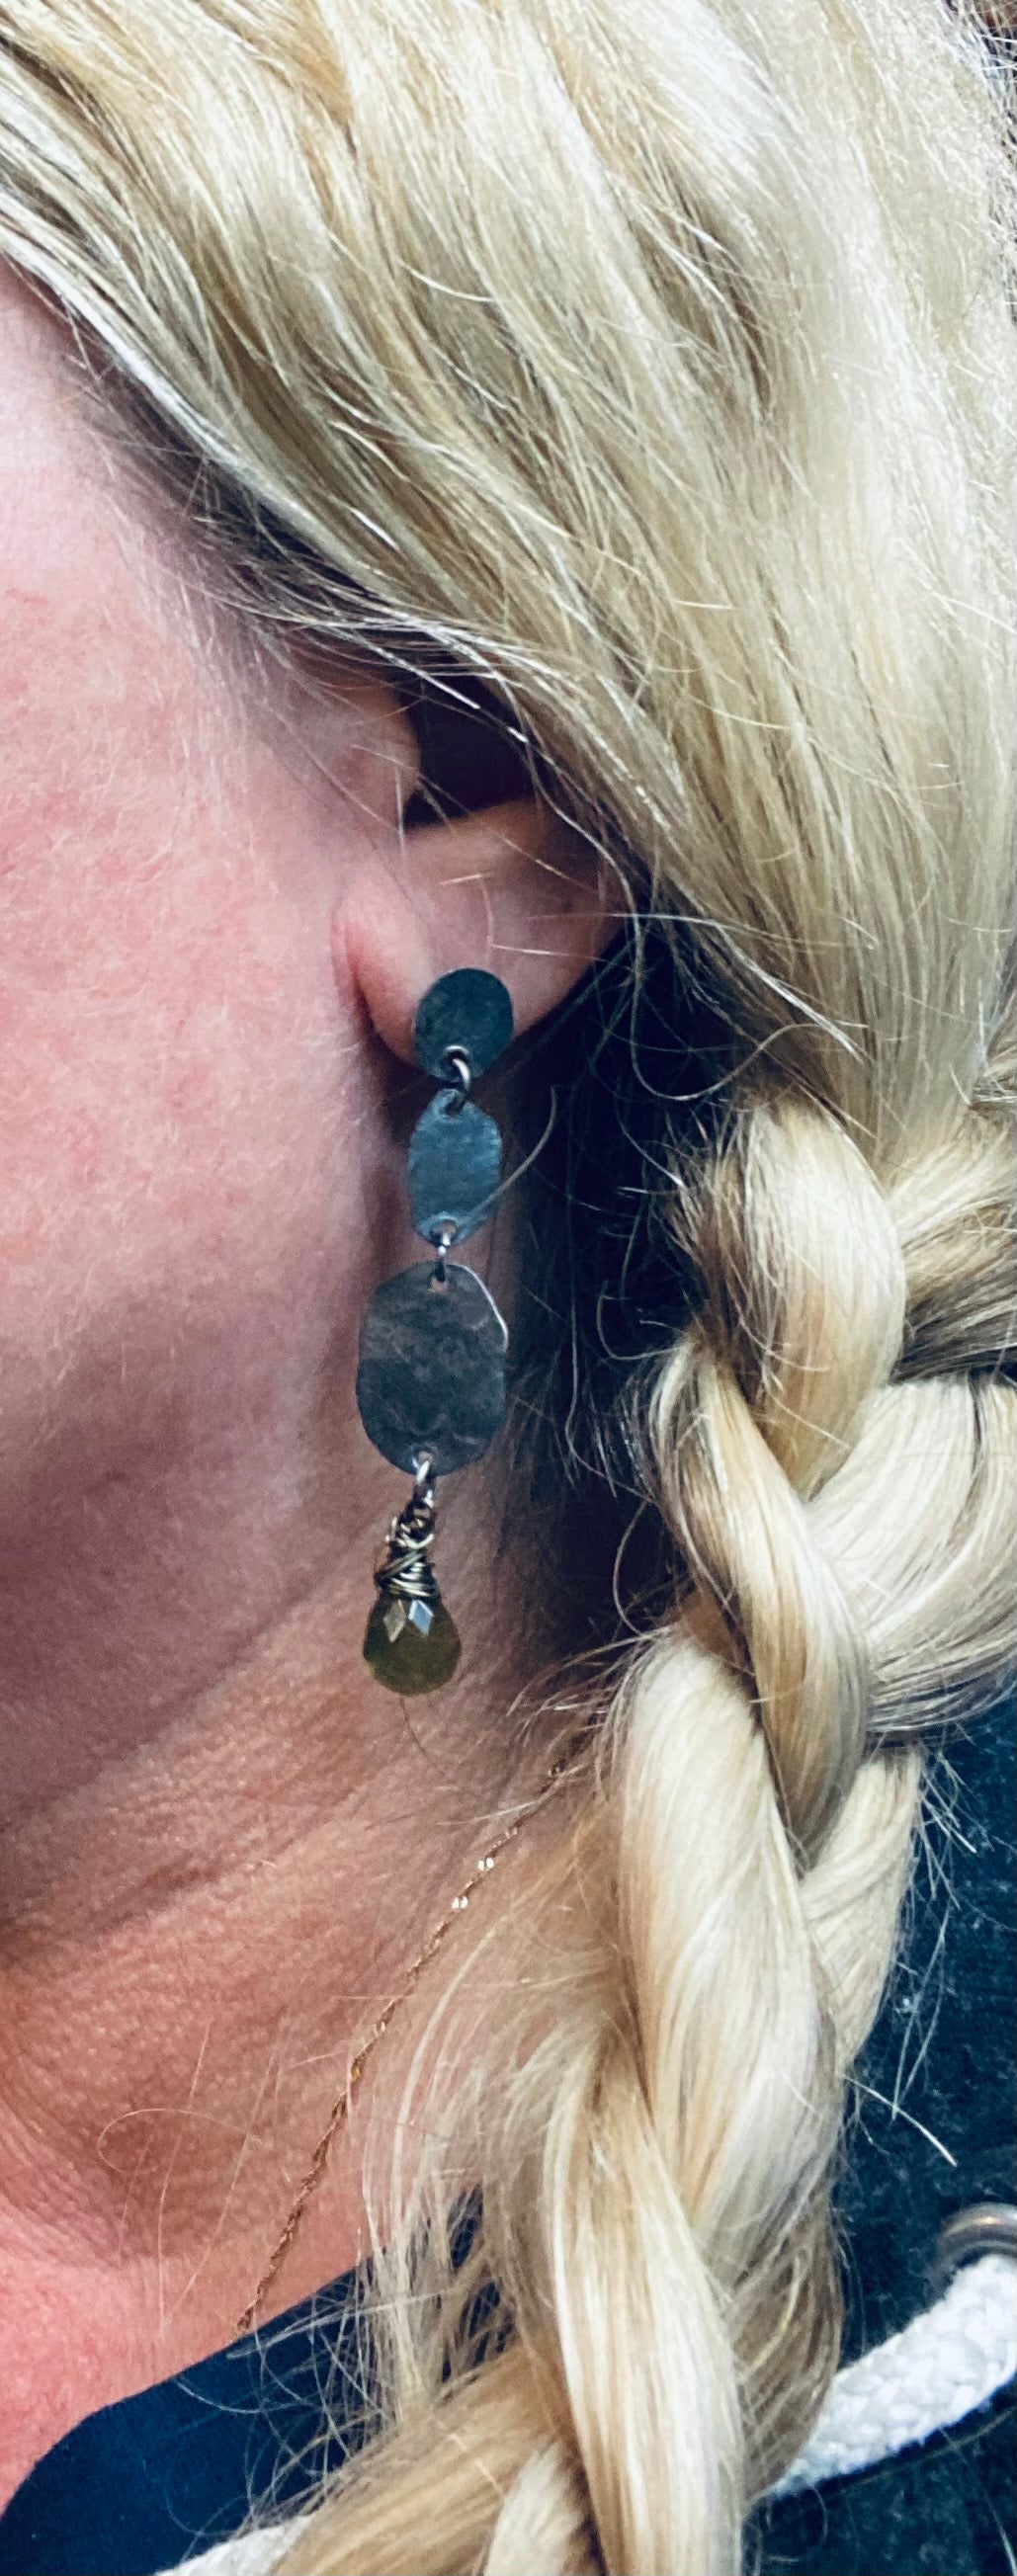 Antiqued Olive Green quartz earring - collectionsbytracy.com